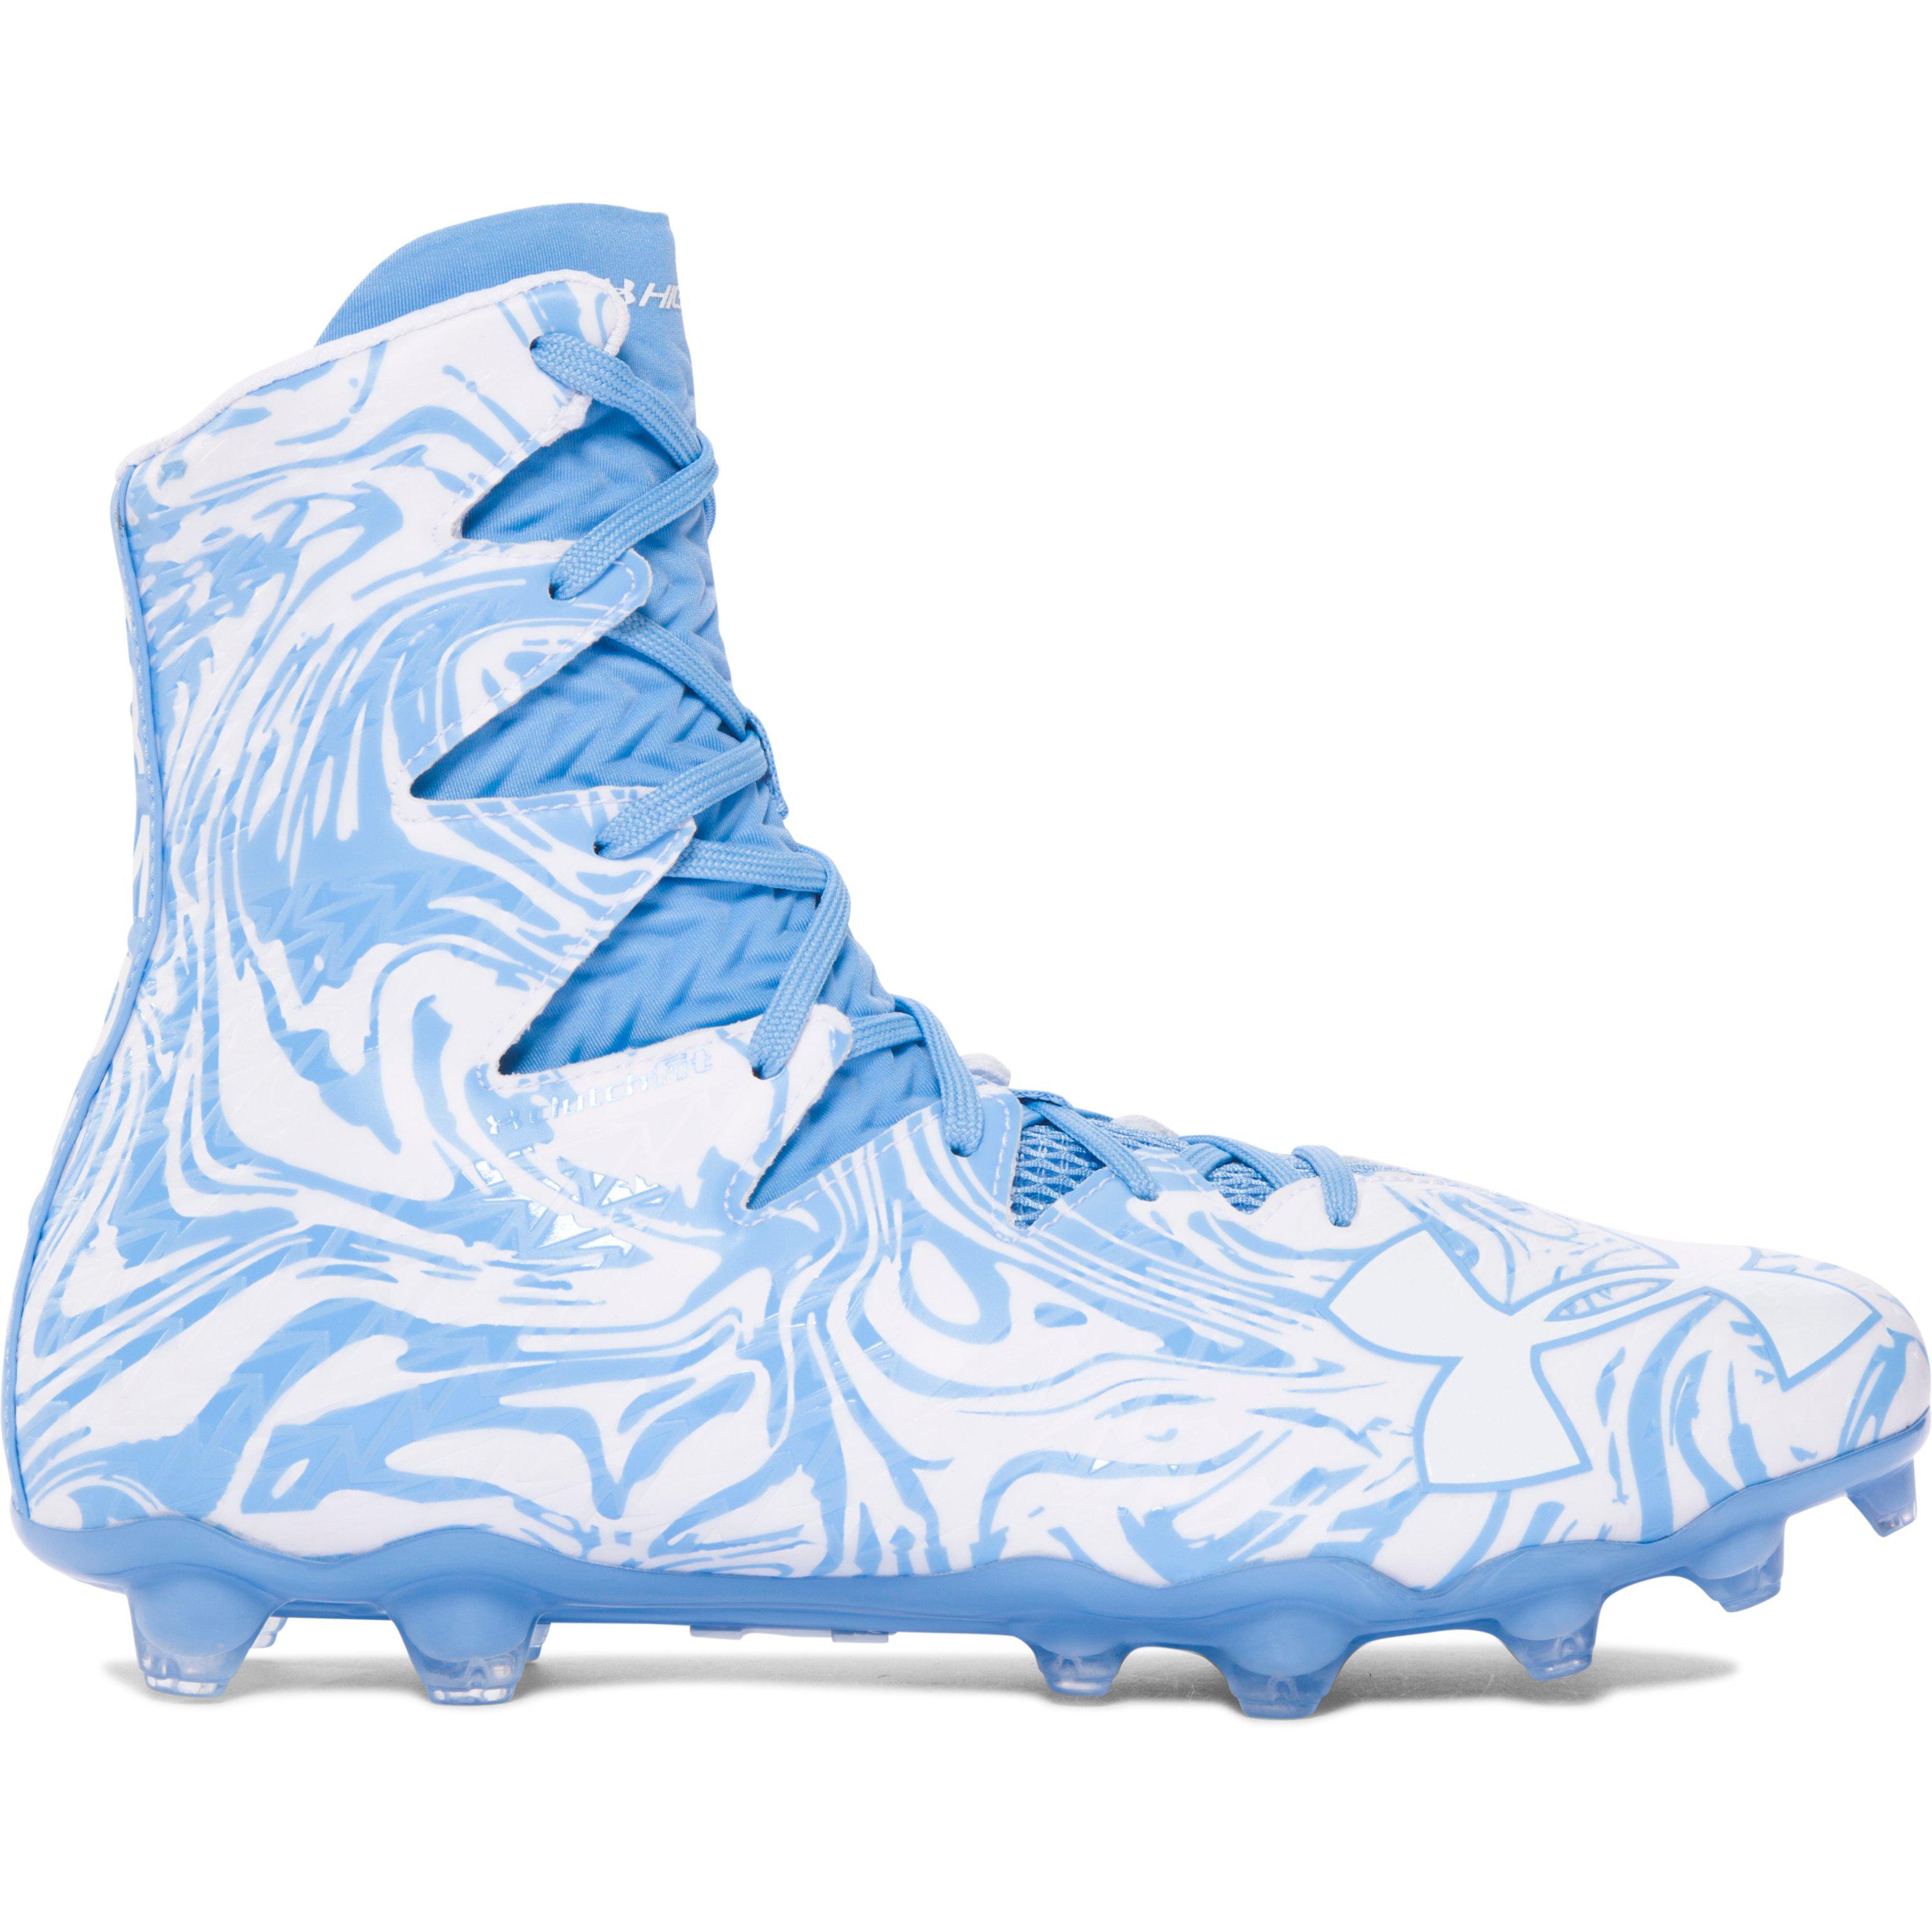 Lyst - Under Armour Men's Ua Highlight Lux Mc Football Cleats in Blue ...